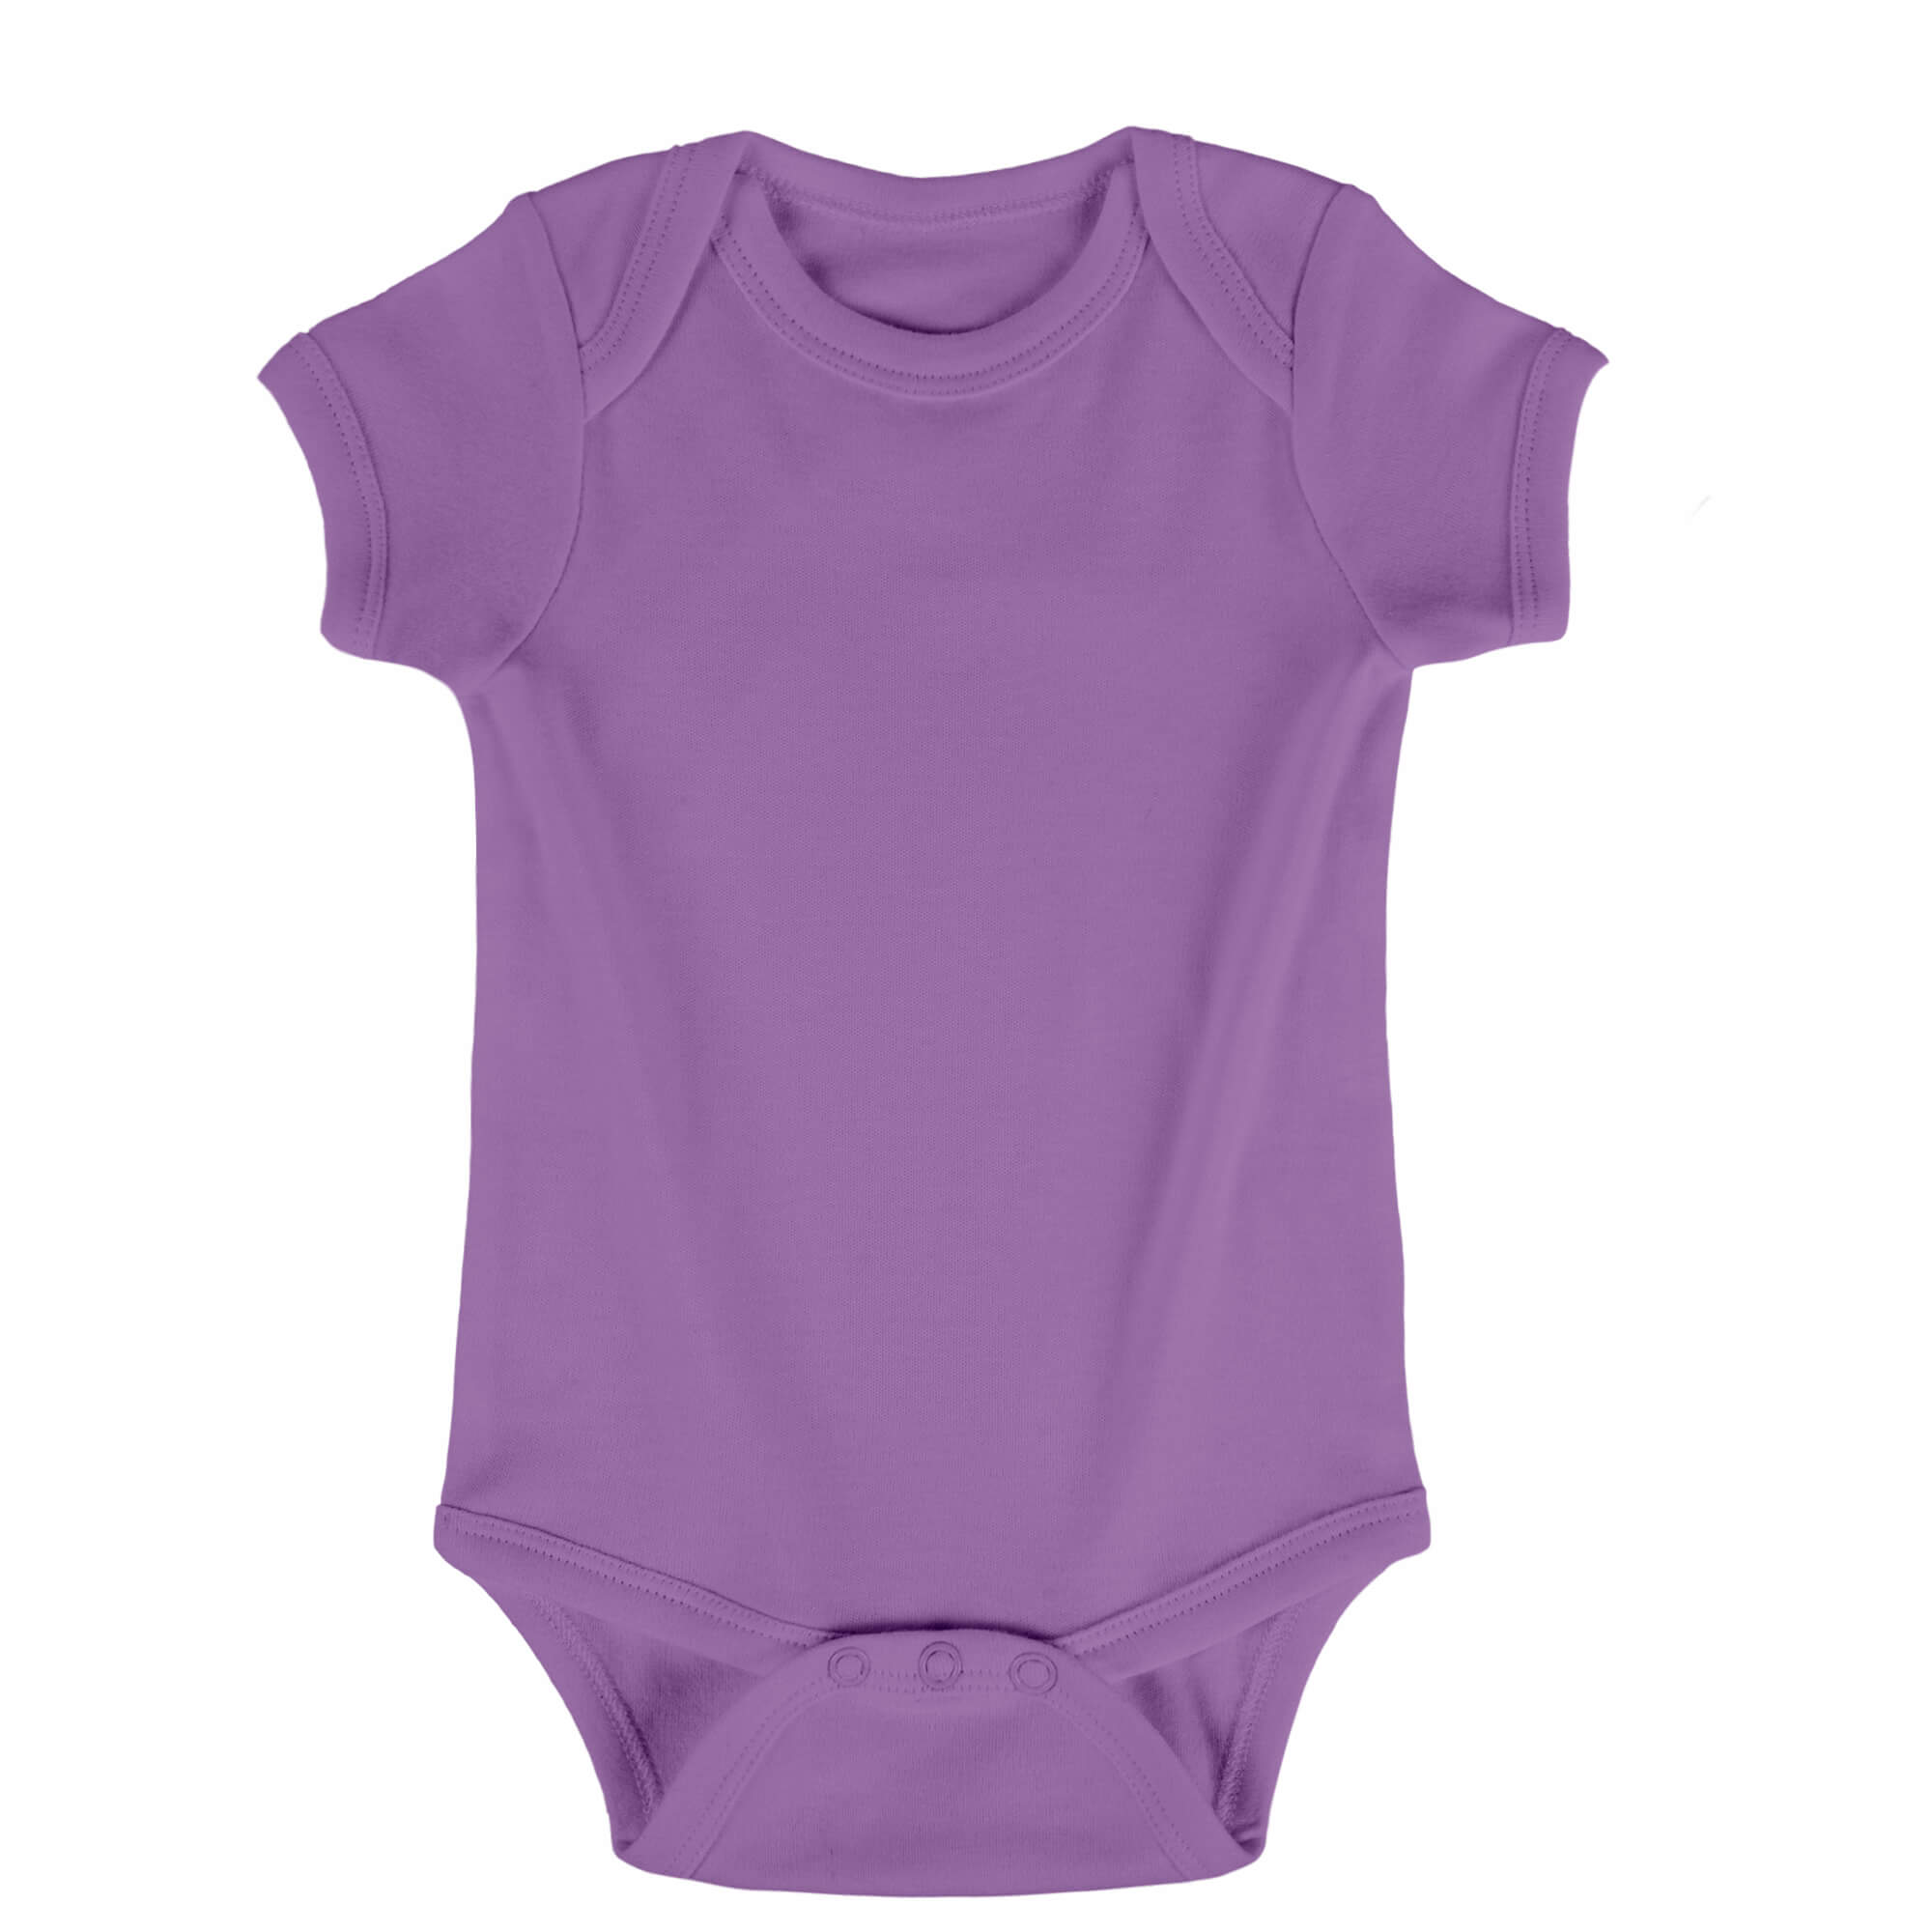 violet color number #50, onesie color selection, and color display.